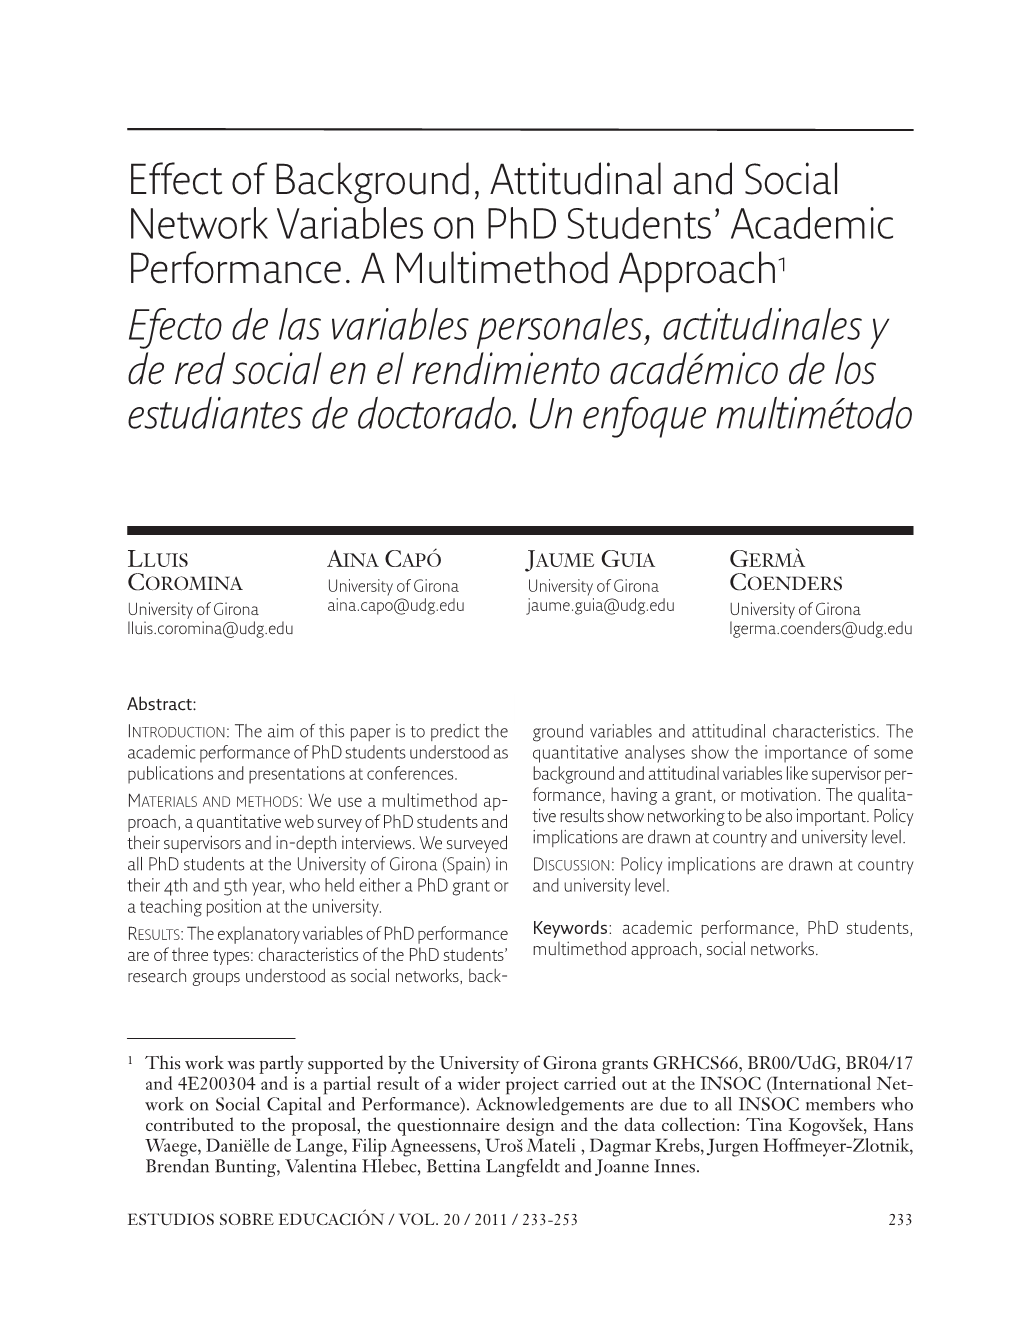 Effect of Background, Attitudinal and Social Network Variables on Phd Students' Academic Performance. a Multimethod Approach1